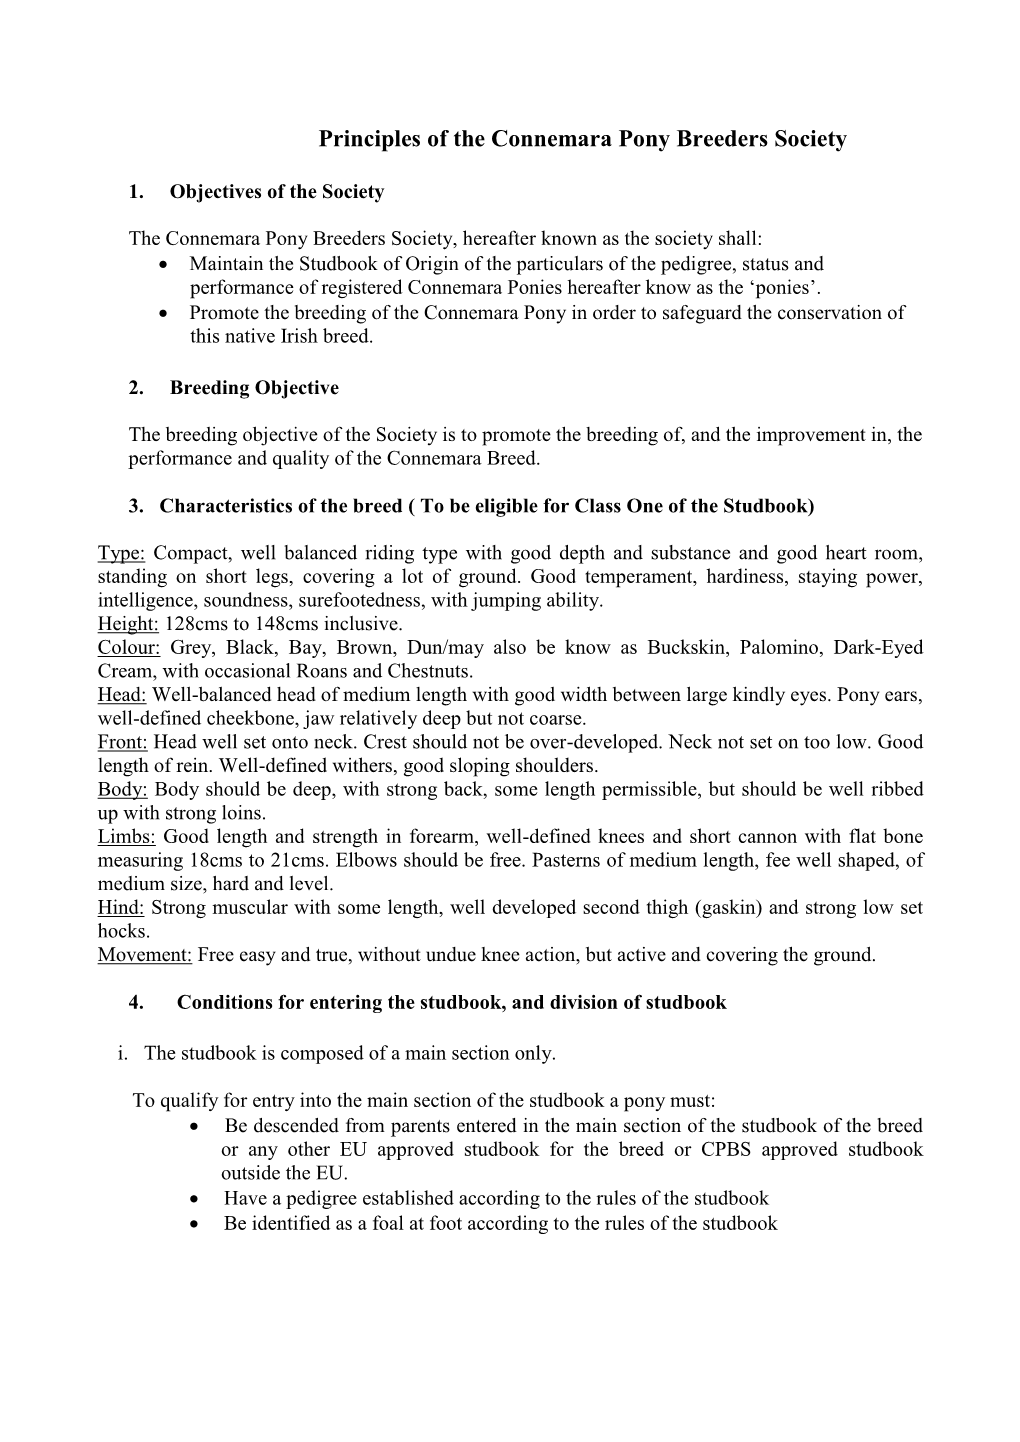 Studbook Rules of the Kerry Bog Pony Co-Operative Society